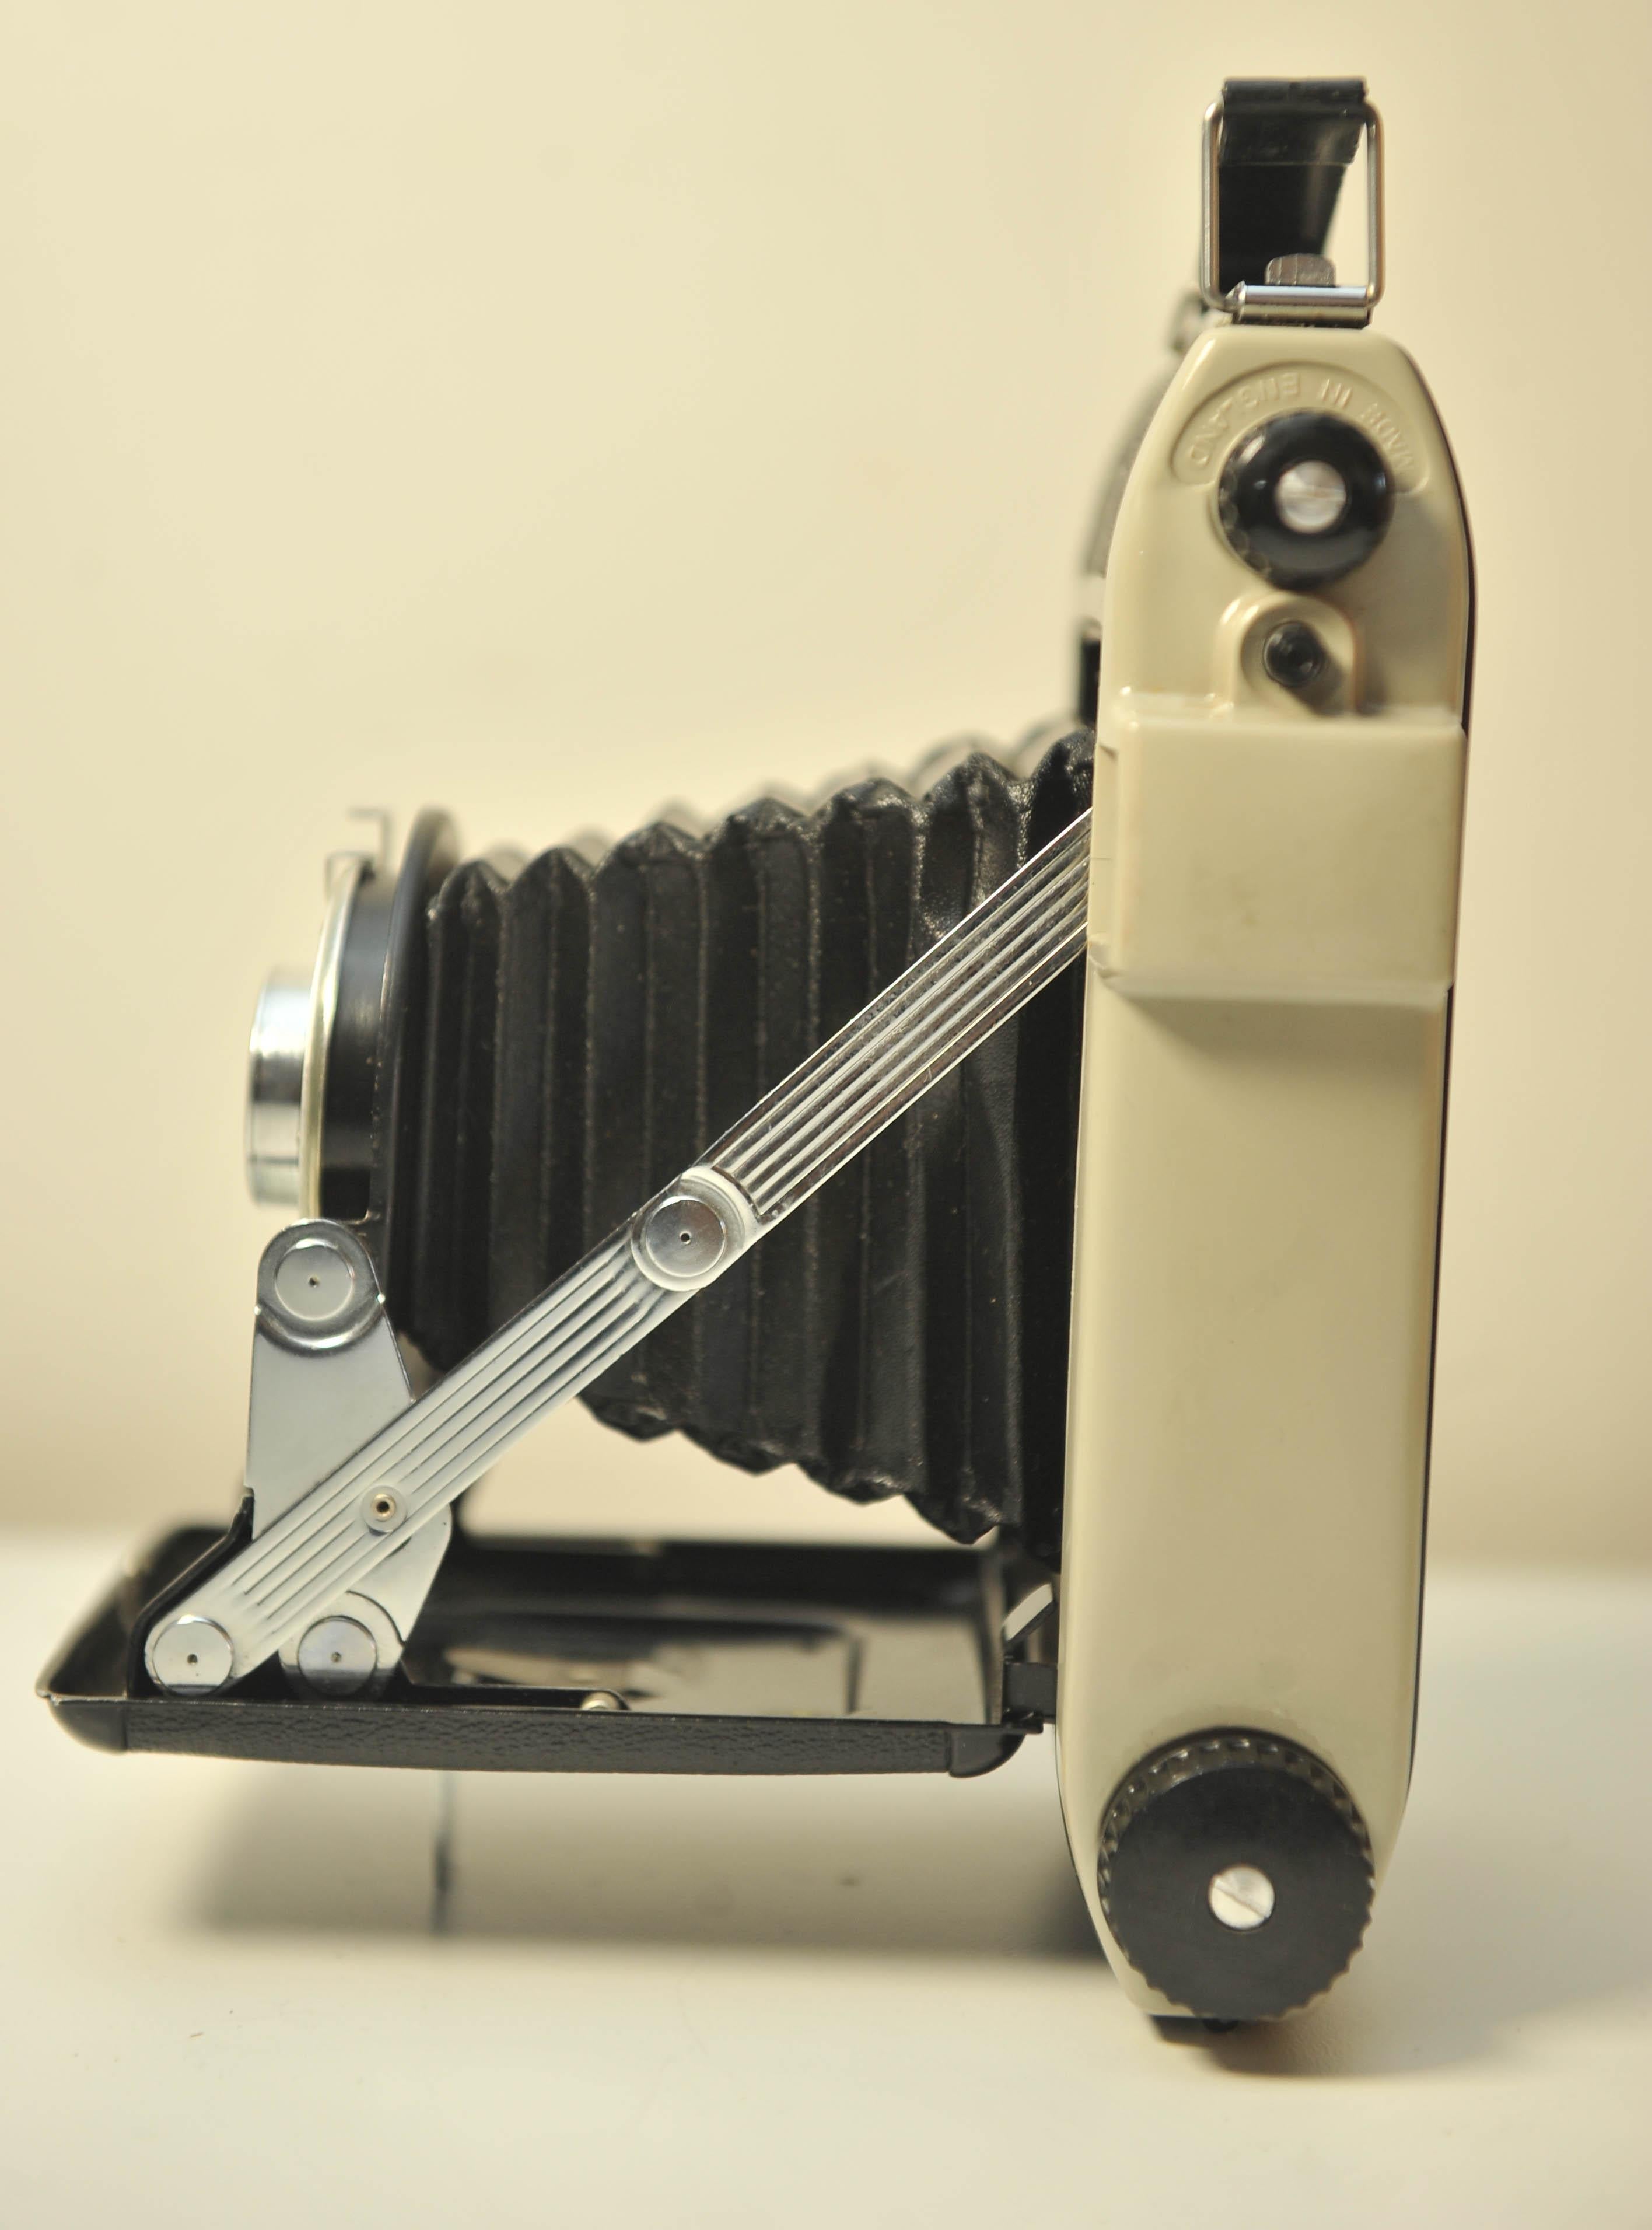 Kodak Junior 1 620 Roll Film Folding Below Camera with Anaston Lens Made between 1954-1959

The Kodak Junior I and II are 620 film folding cameras made by Kodak Ltd. in the UK. They were introduced in July 1954 and made until 1959. The same body -